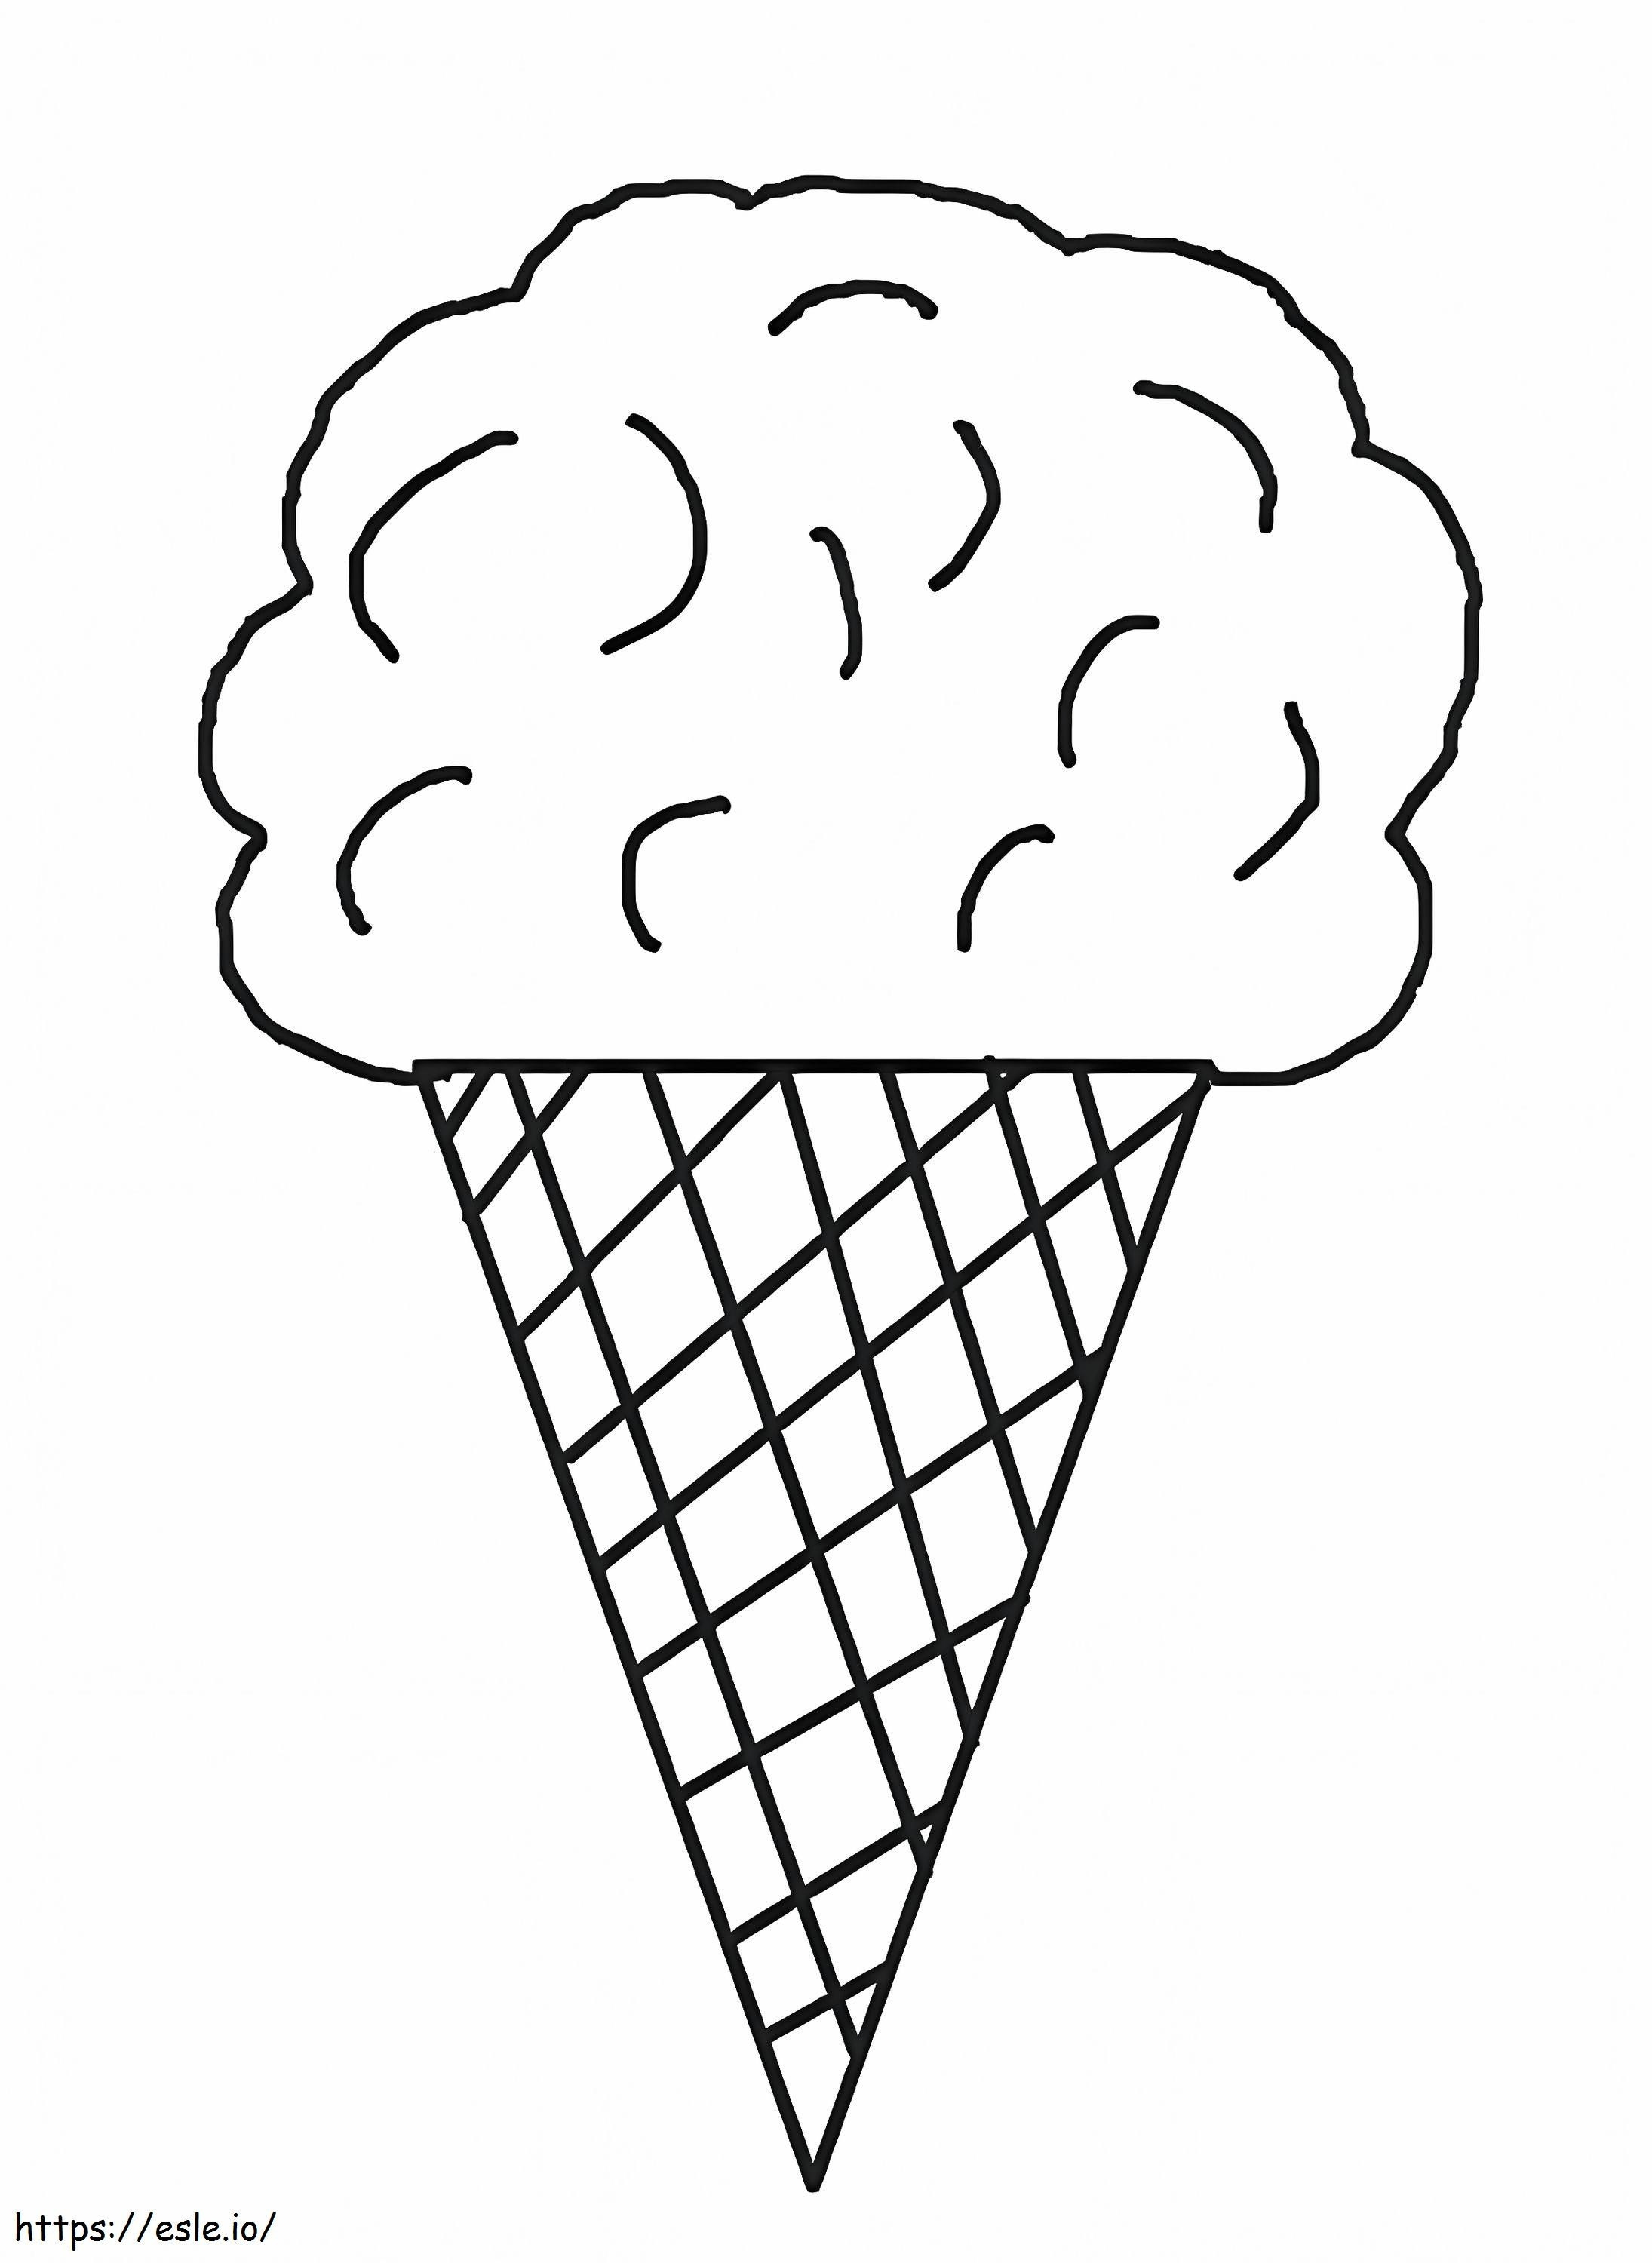 Simple Ice Cream coloring page